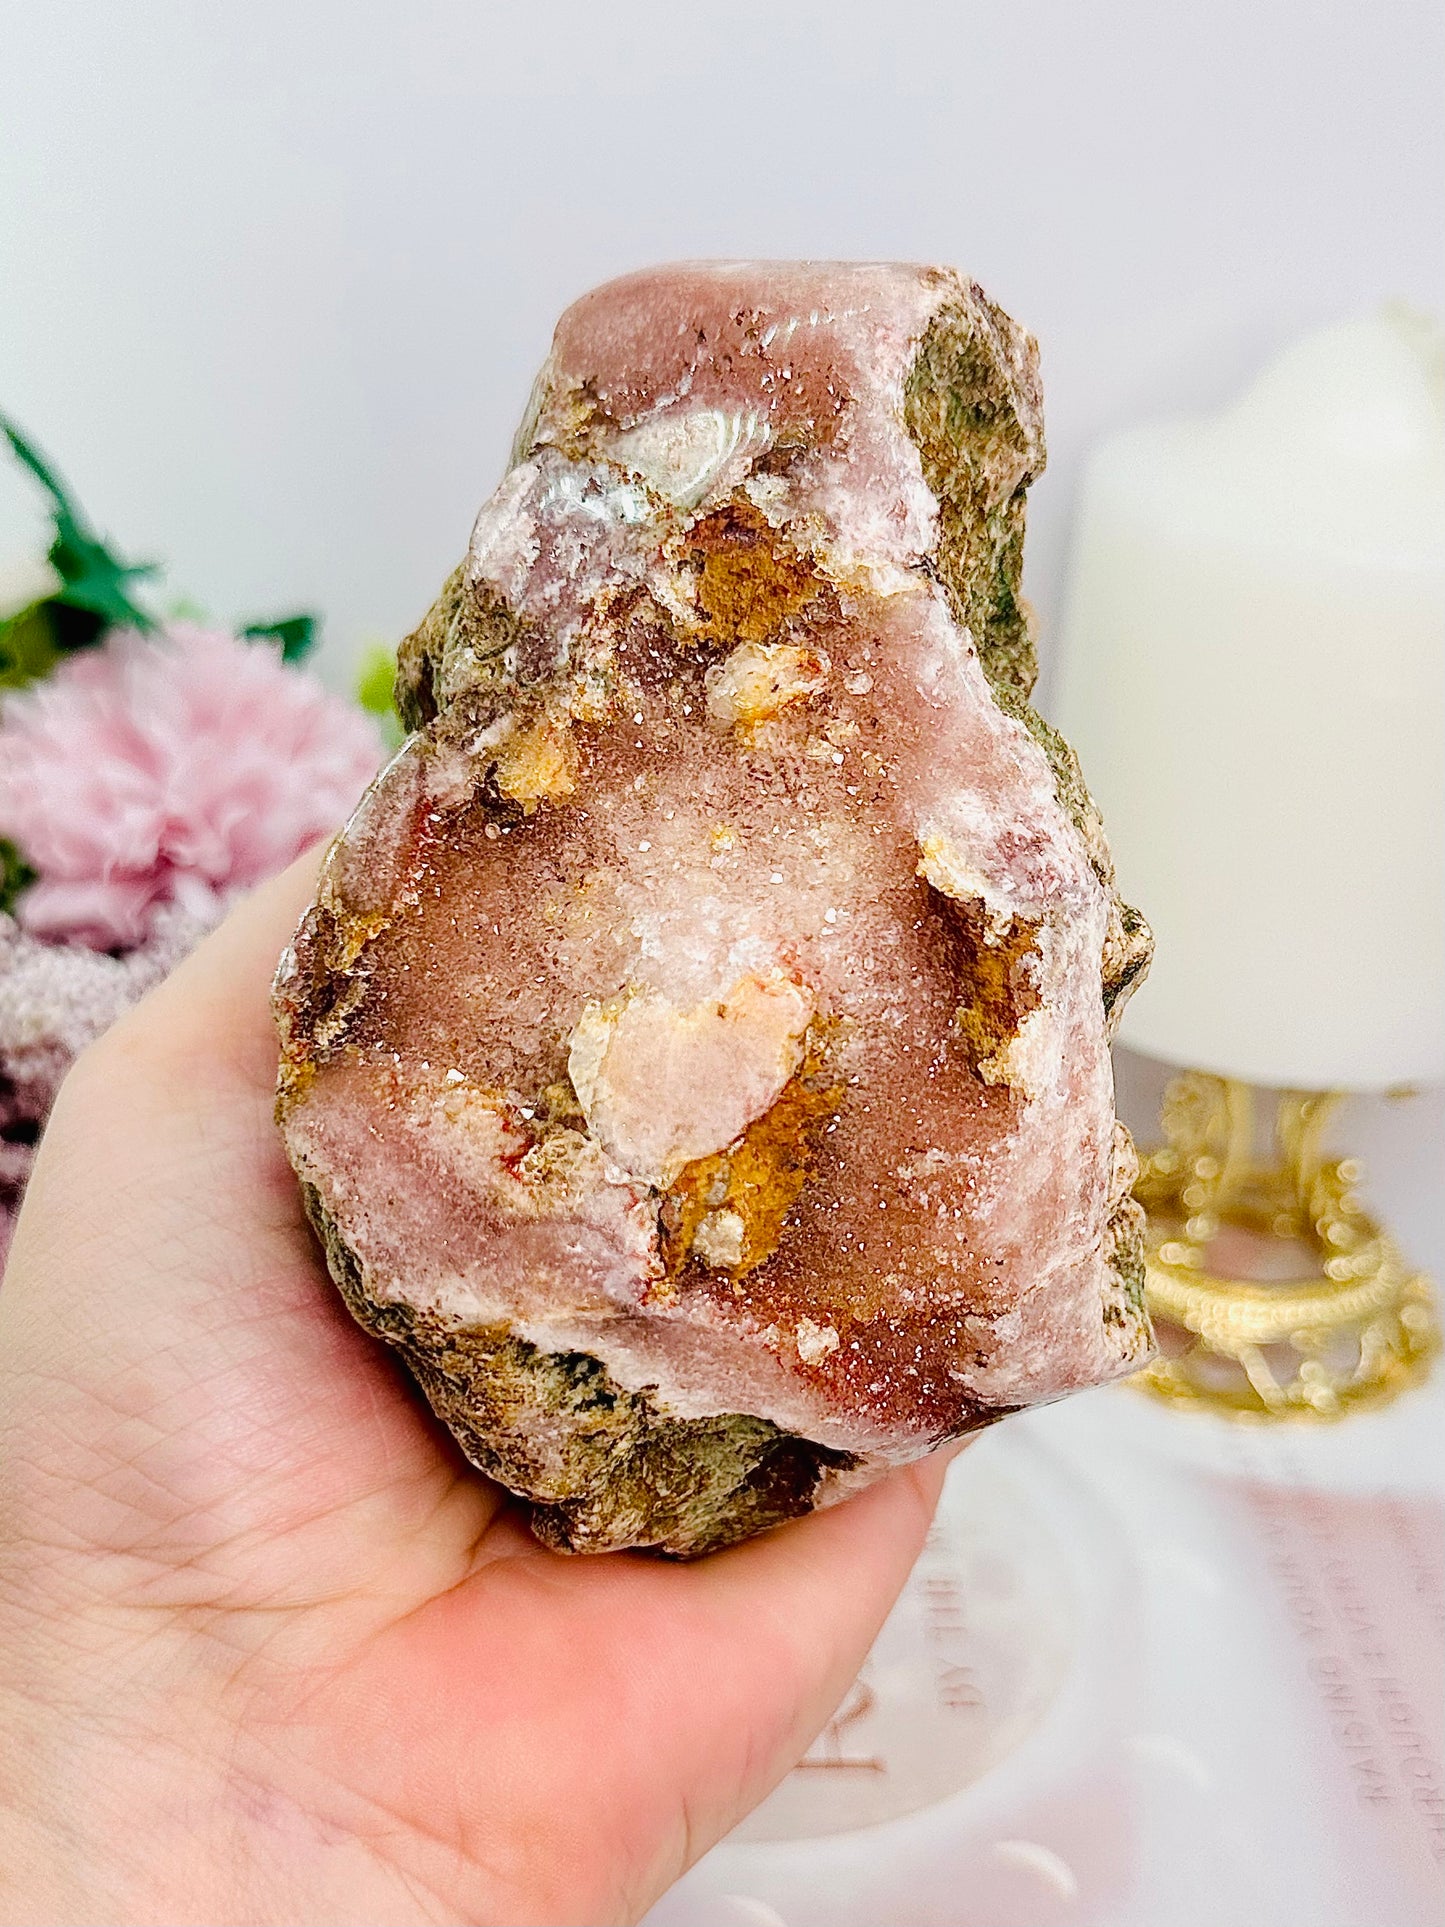 Calming & Cleansing - Over Half a KG Pink Amethyst Druzy Freeform From Argentina